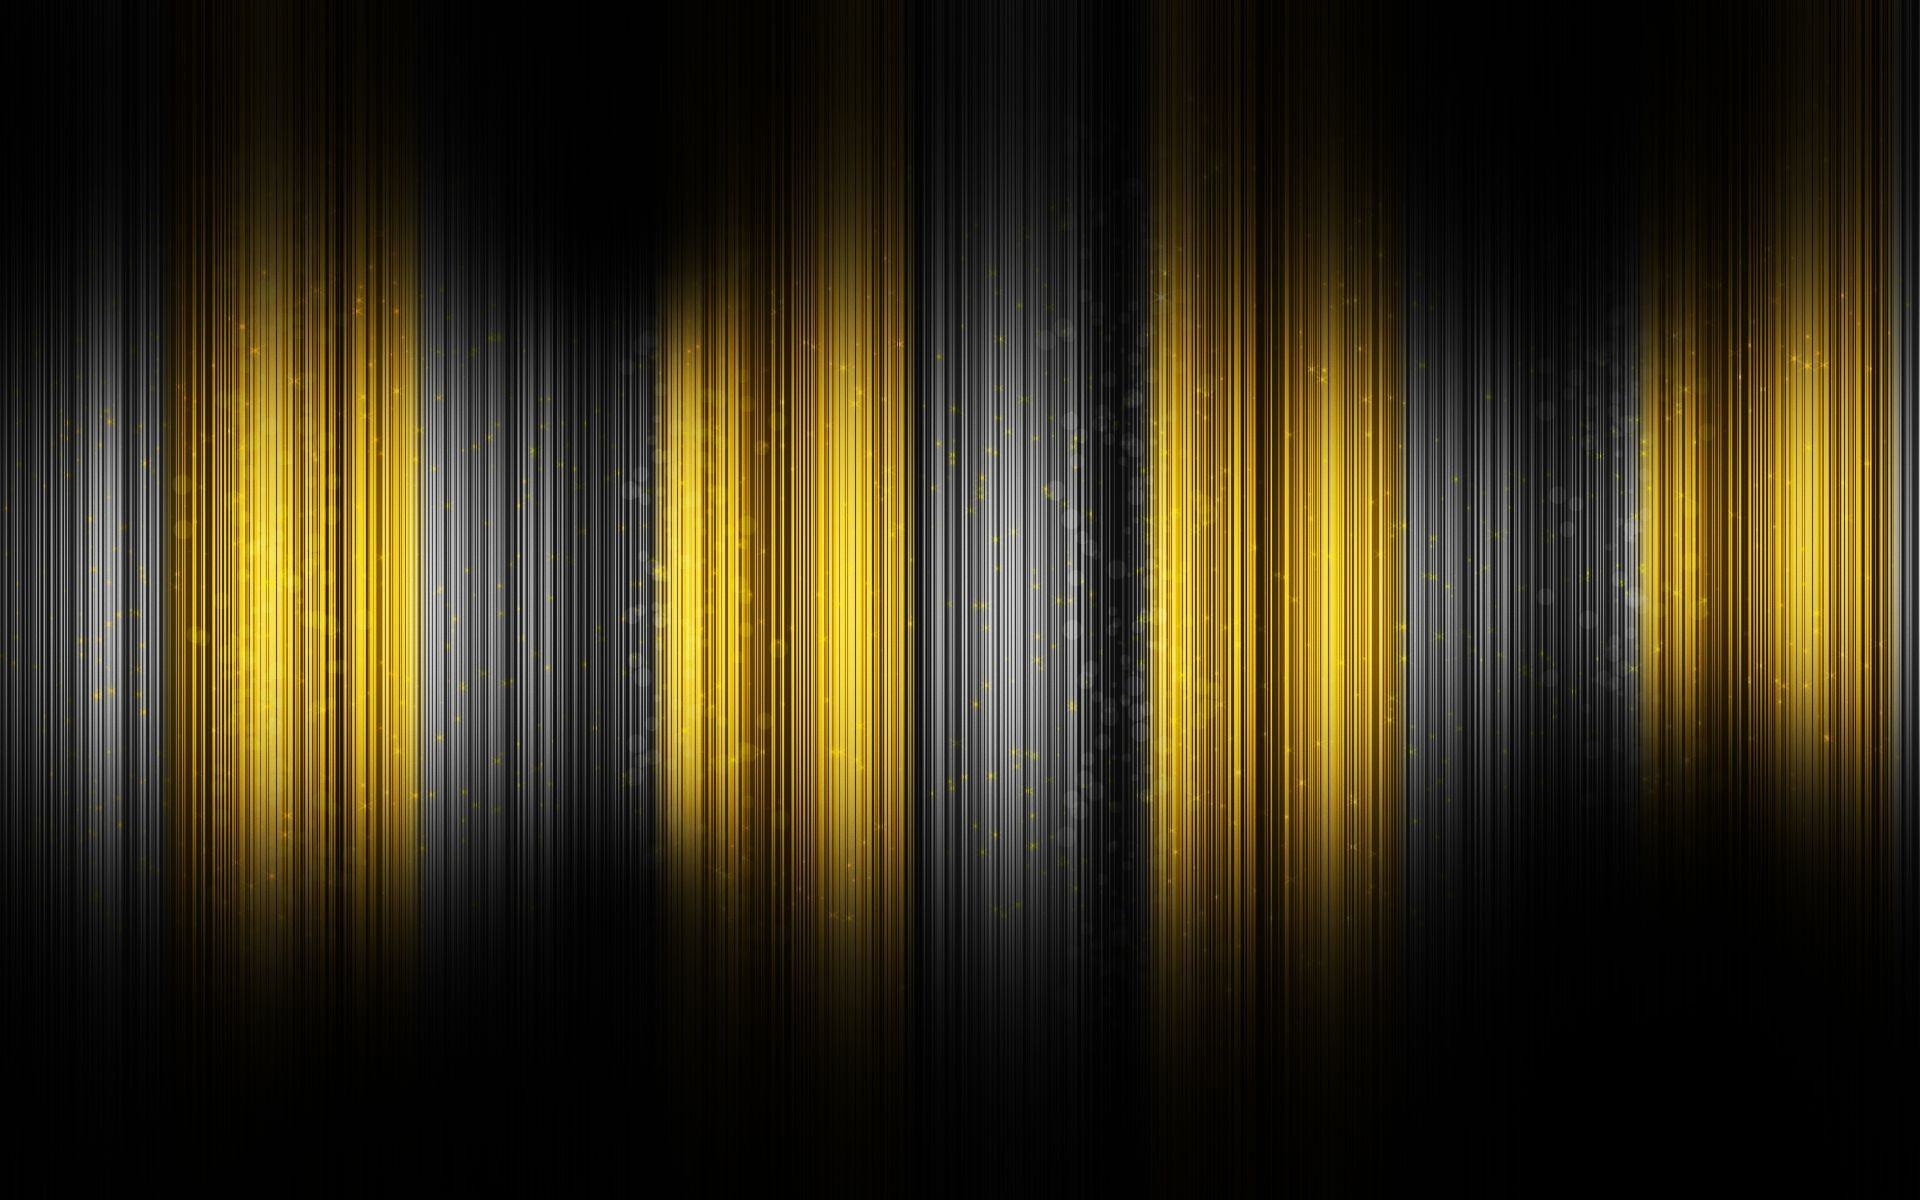 1920x1200 Abstract-yellow-and-black-latest-hd-wallpaper - Â· Background Hd  WallpaperMusic ...